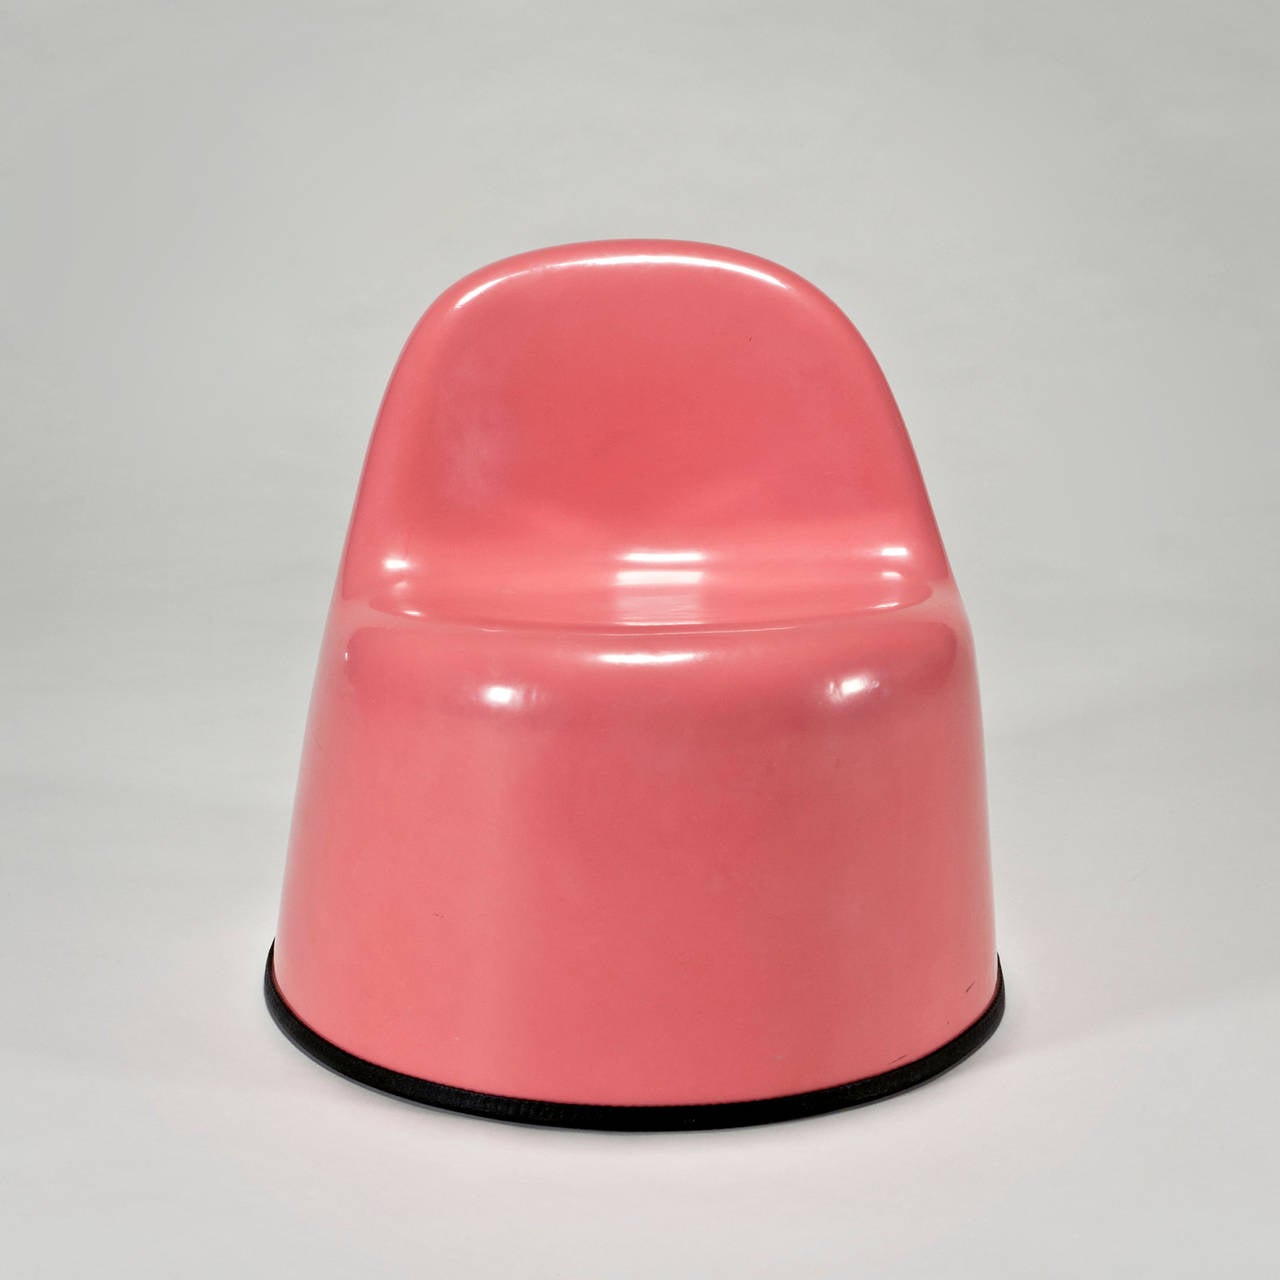 Often referred to as the Baby Molar Chair, this is an early, pre-production, signed version, made in Castle's own studio in fiberglass. Although pulled from a single mold, each one was essentially unique, and produced in very small quantities. The